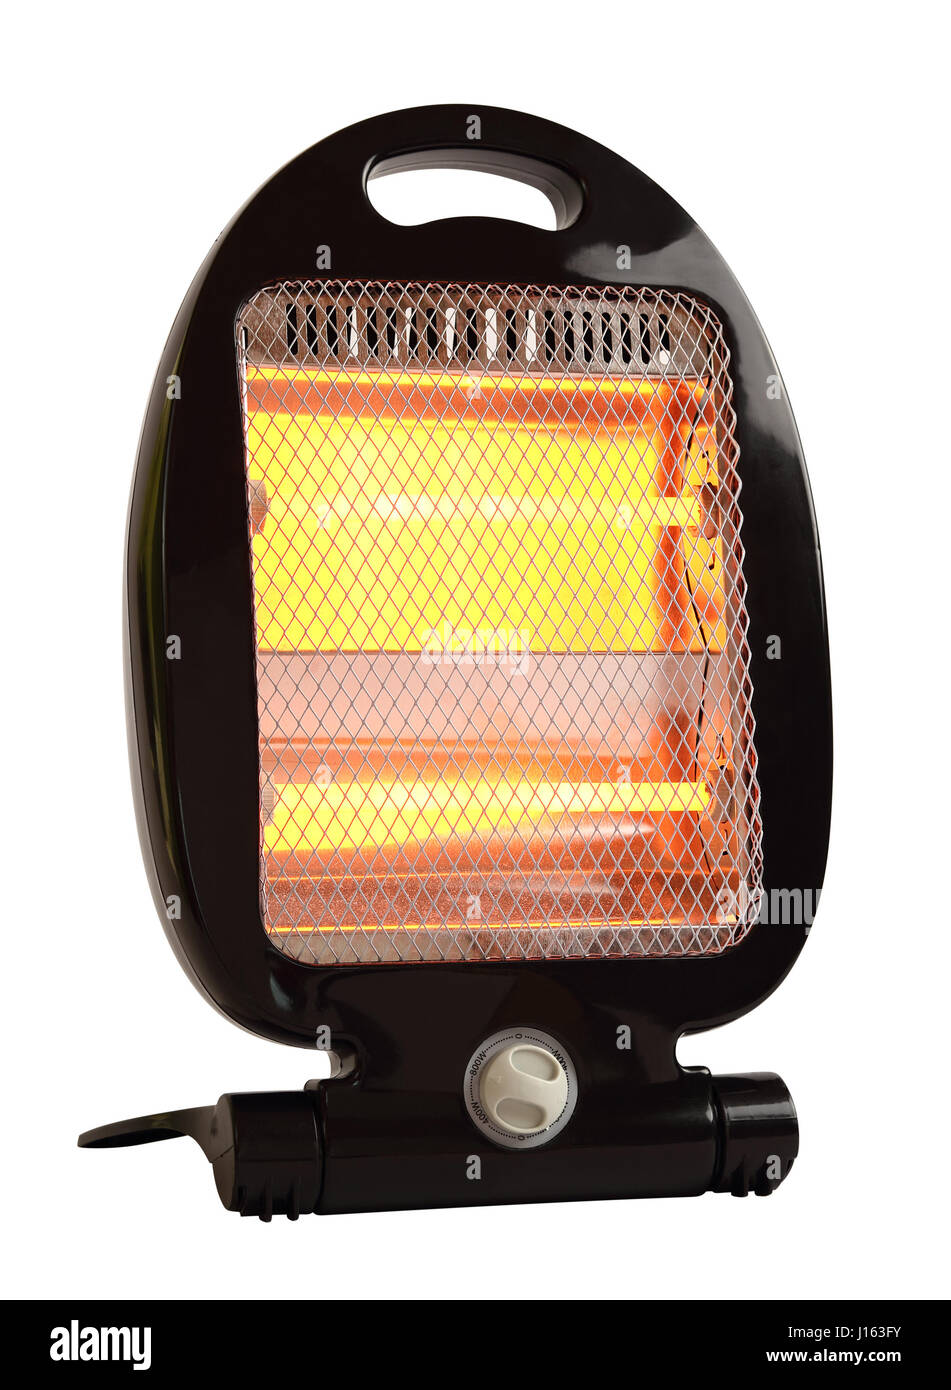 Quartz halogen heater with glowing bars. Isolated with clipping path. Stock Photo